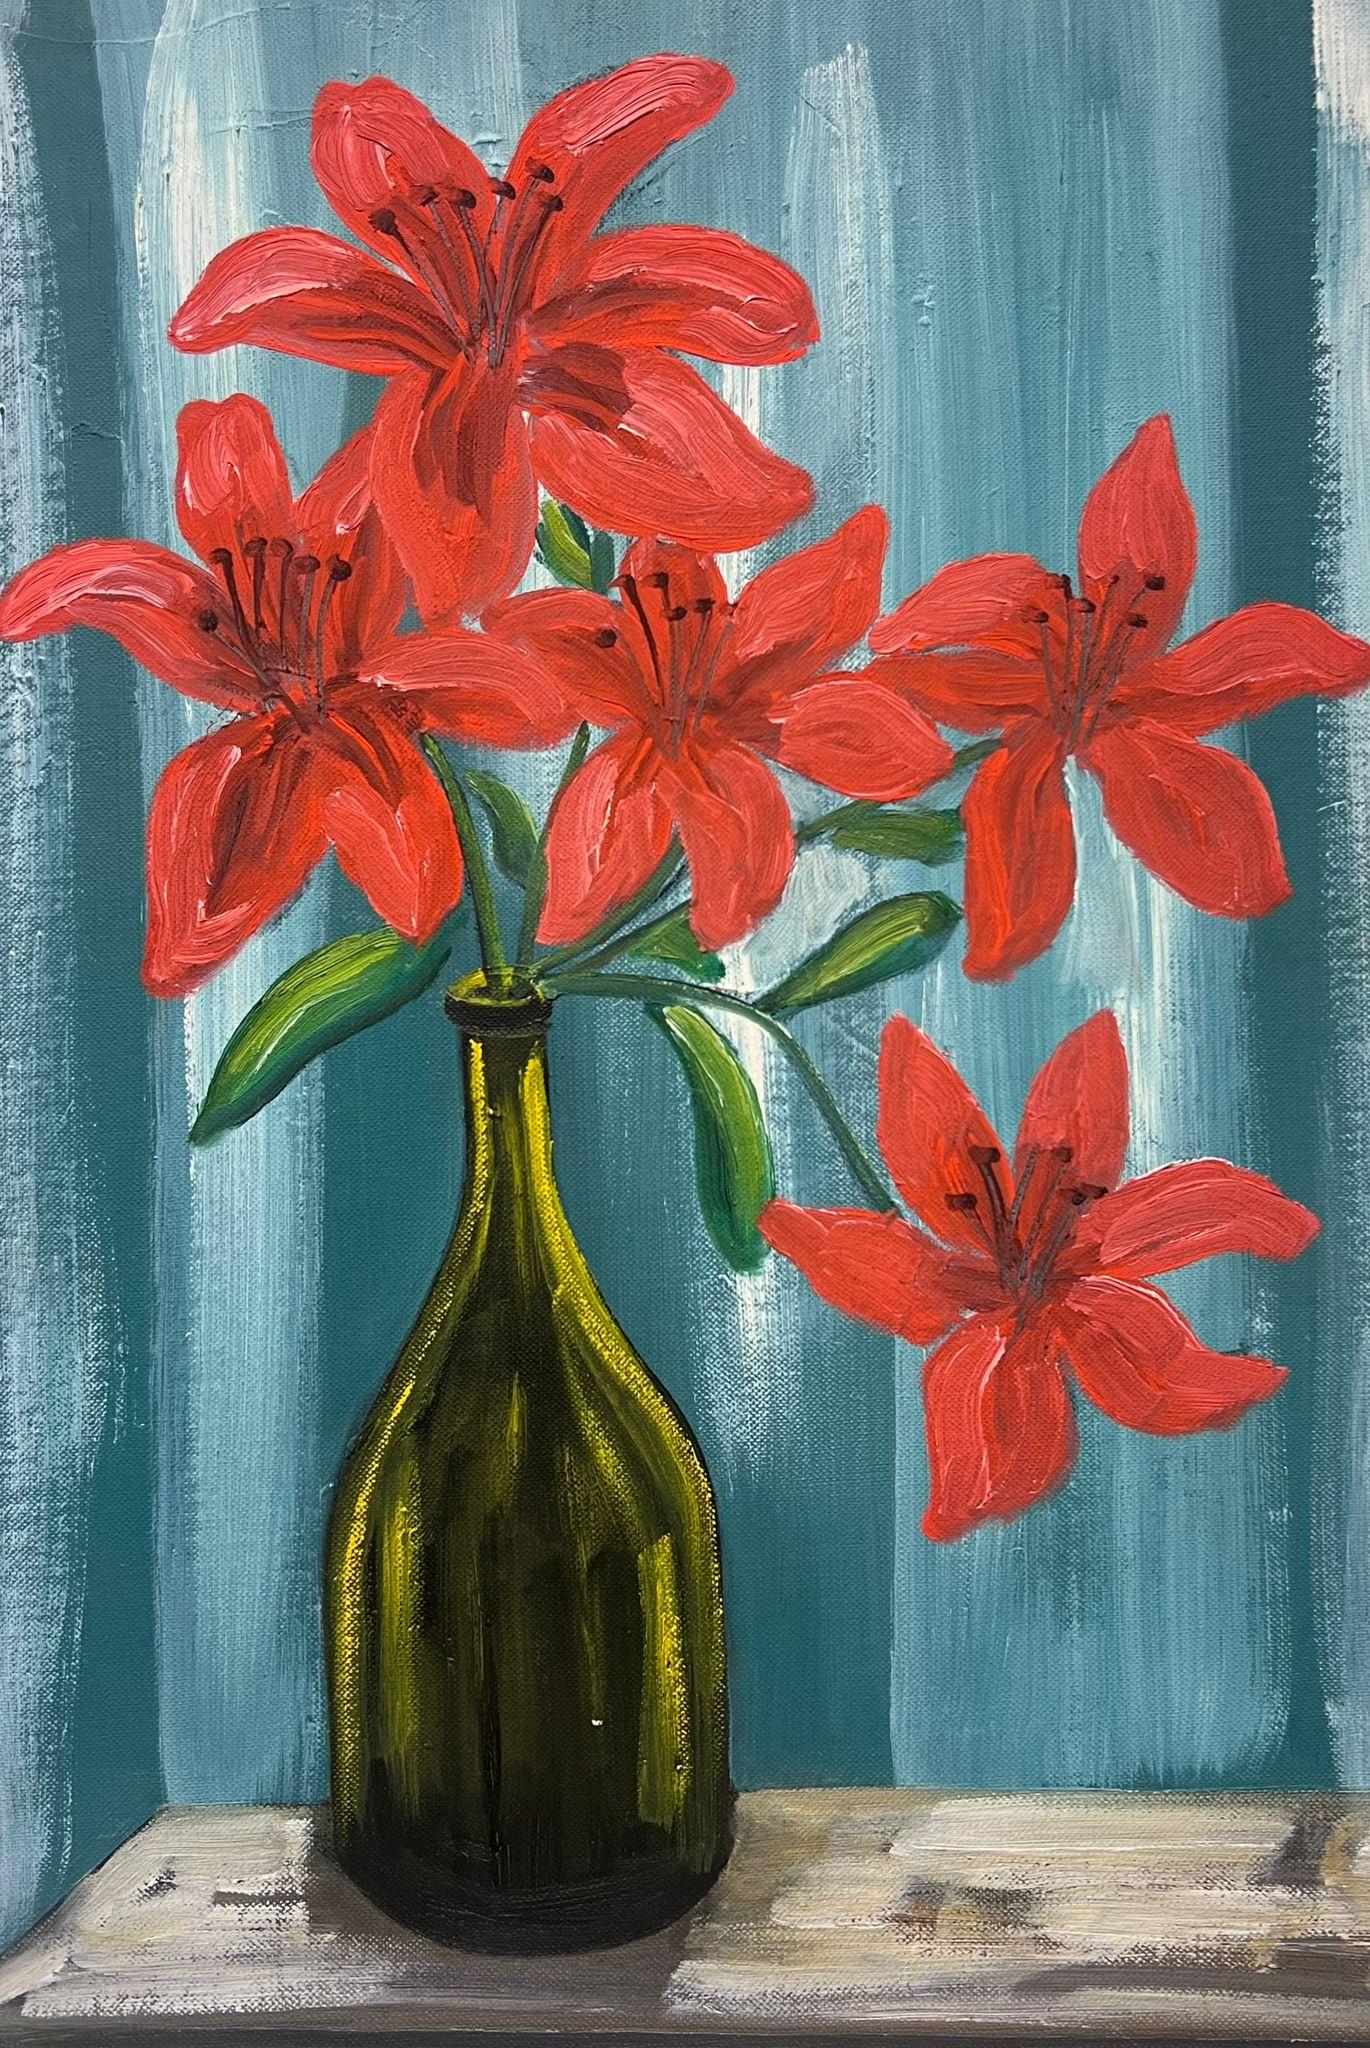 Mid 20th Century French Oil Painting Red Lilies In Green Glass Bottle Interior  For Sale 2